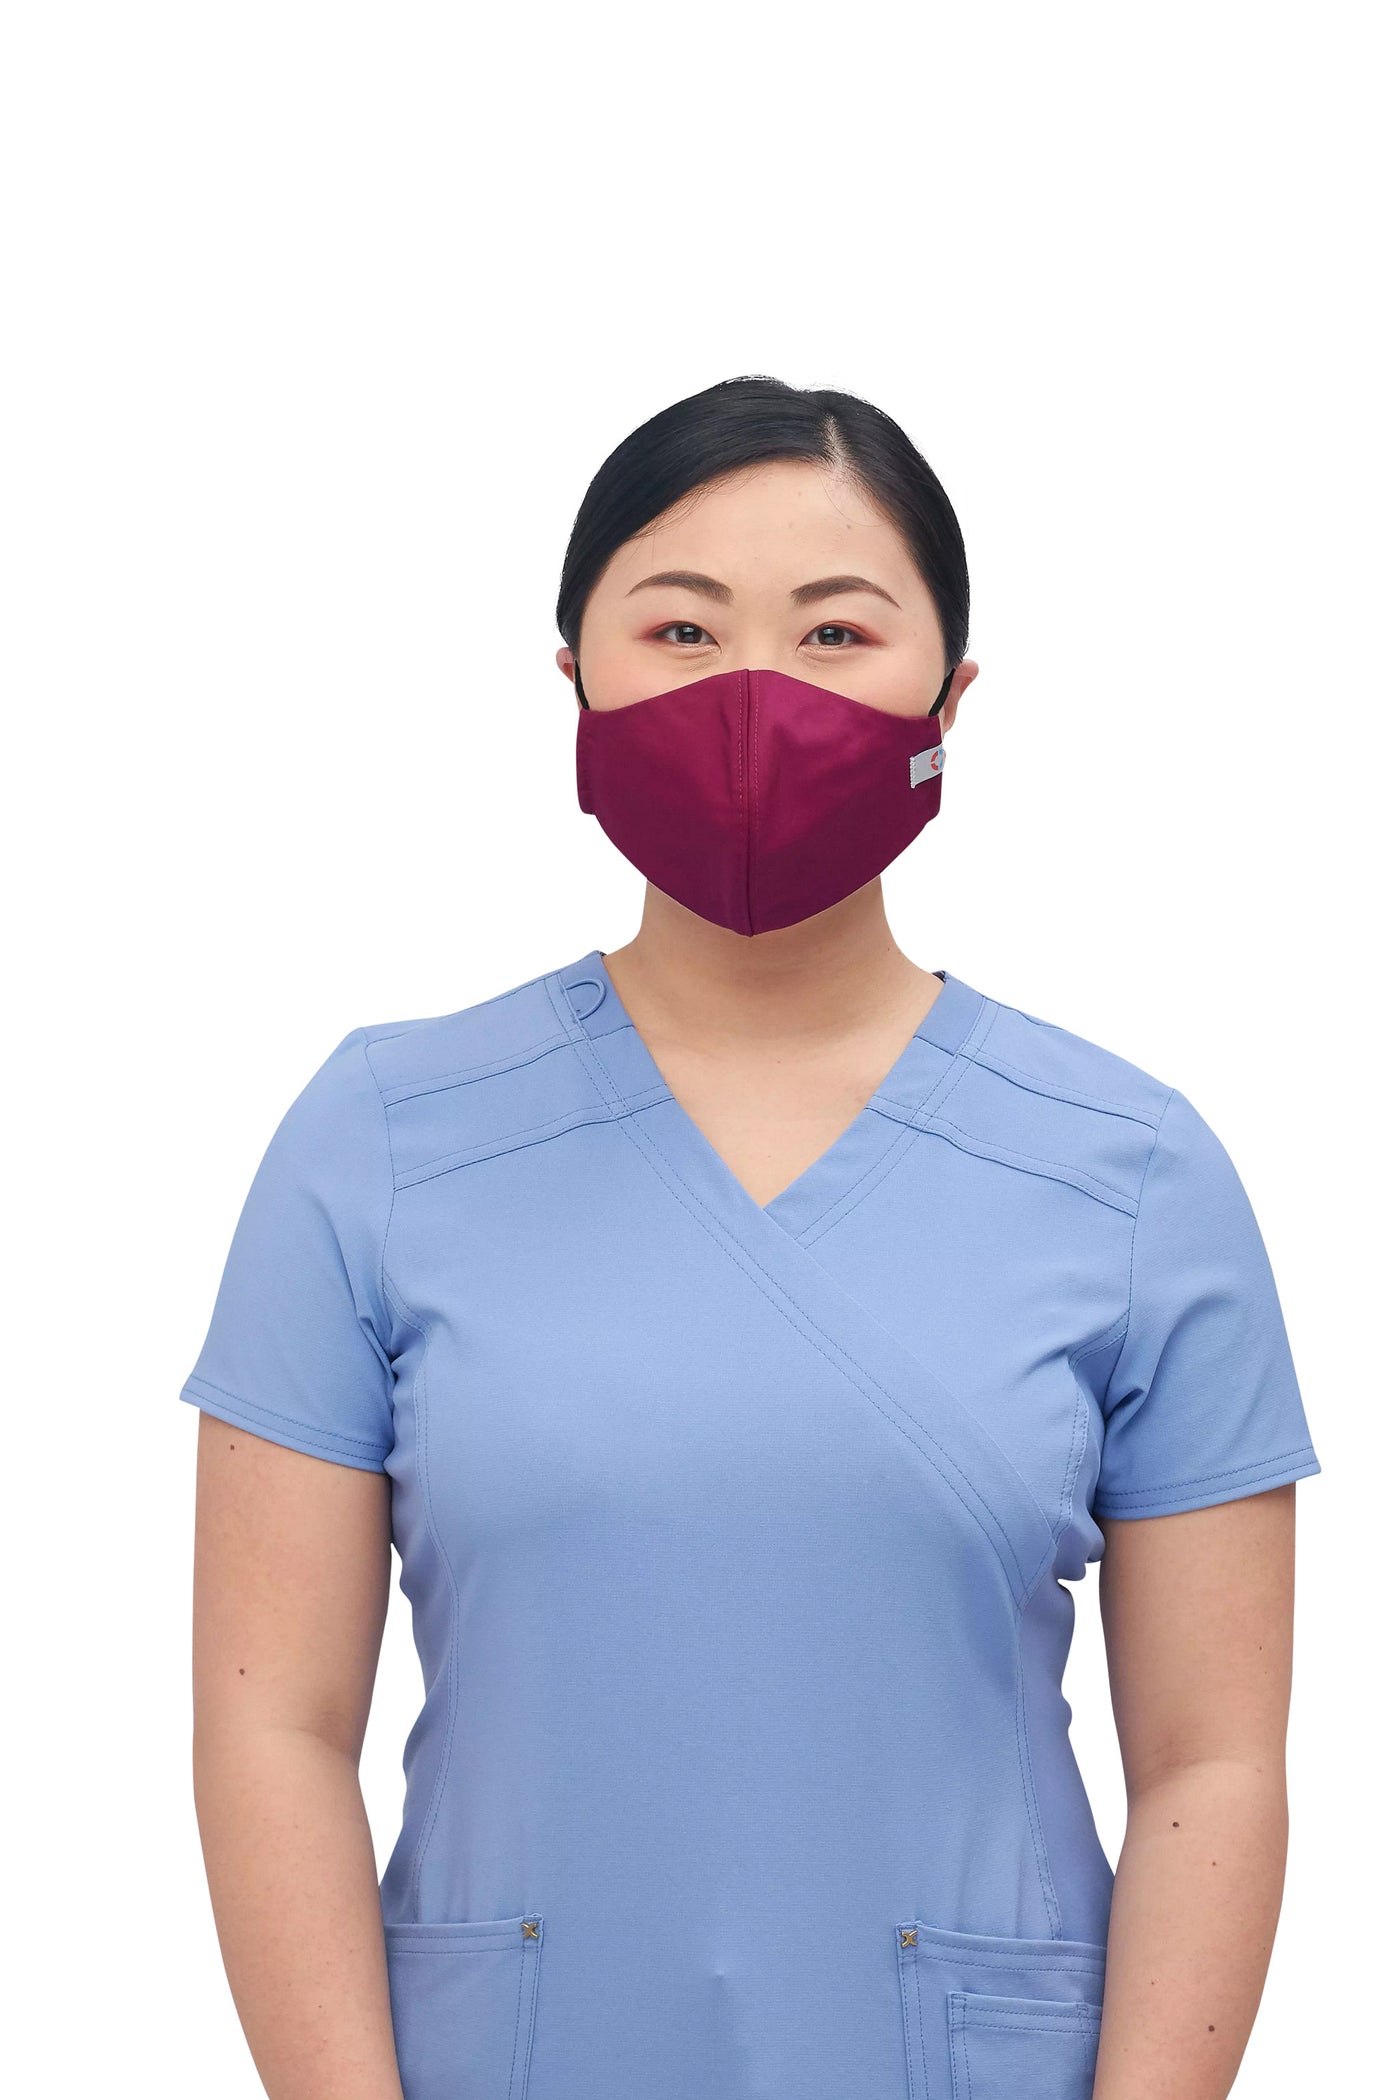 Wine - Cherokee Workwear Revolution Tech Face Covering (Pack Of 5)